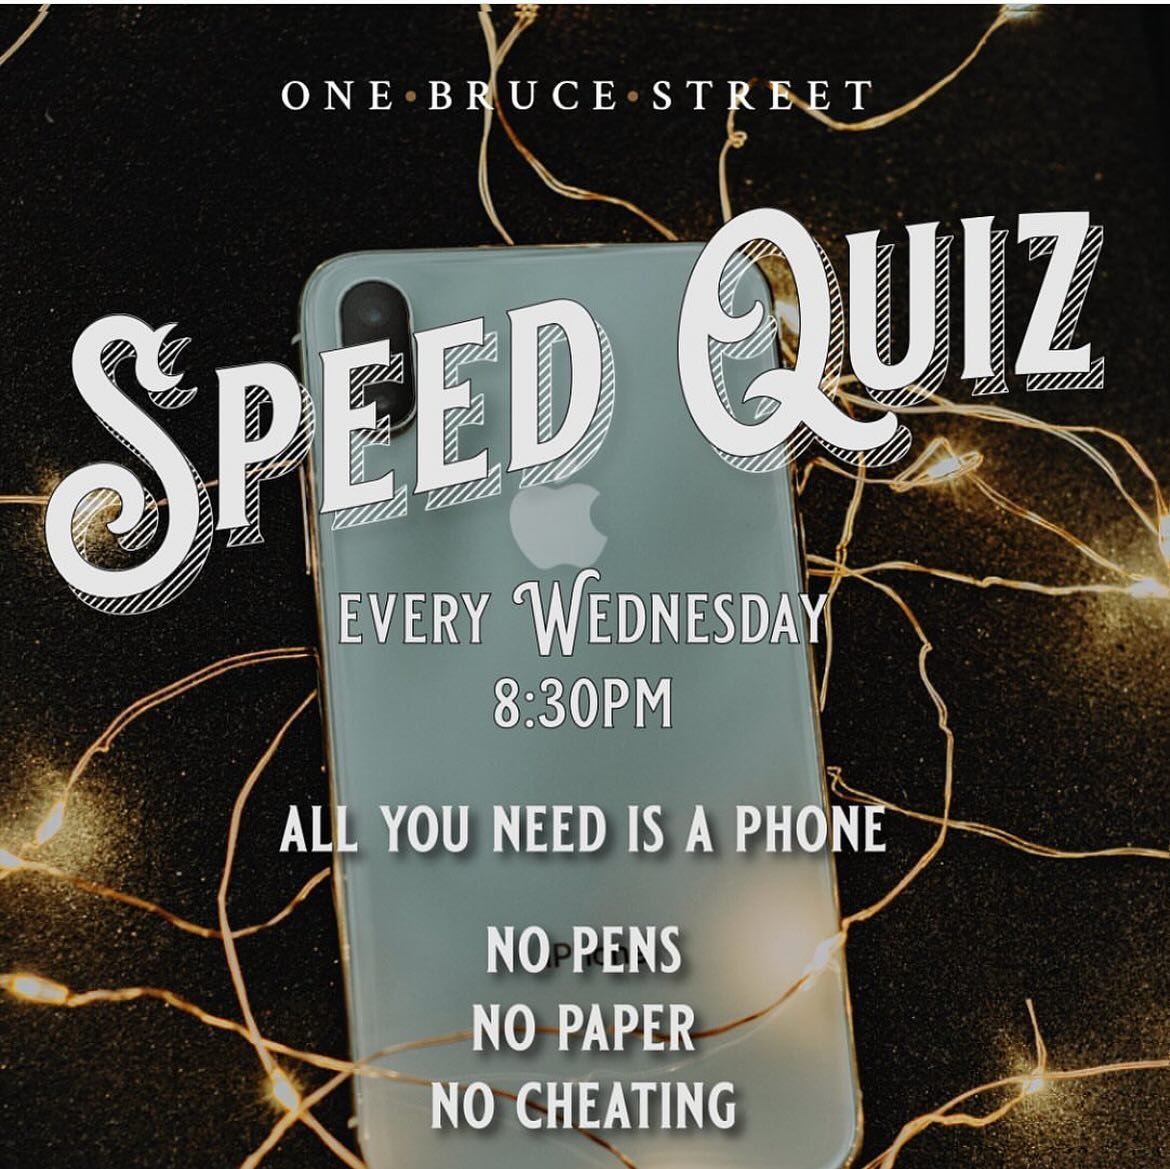 After a short hiatus as our Dave was unwell, let&rsquo;s welcome him back tonight to our speed quiz 🙌🏻

No pens, no paper, just bring your smart phone 📱 

8:30pm till late, mon down you know you want to 👀